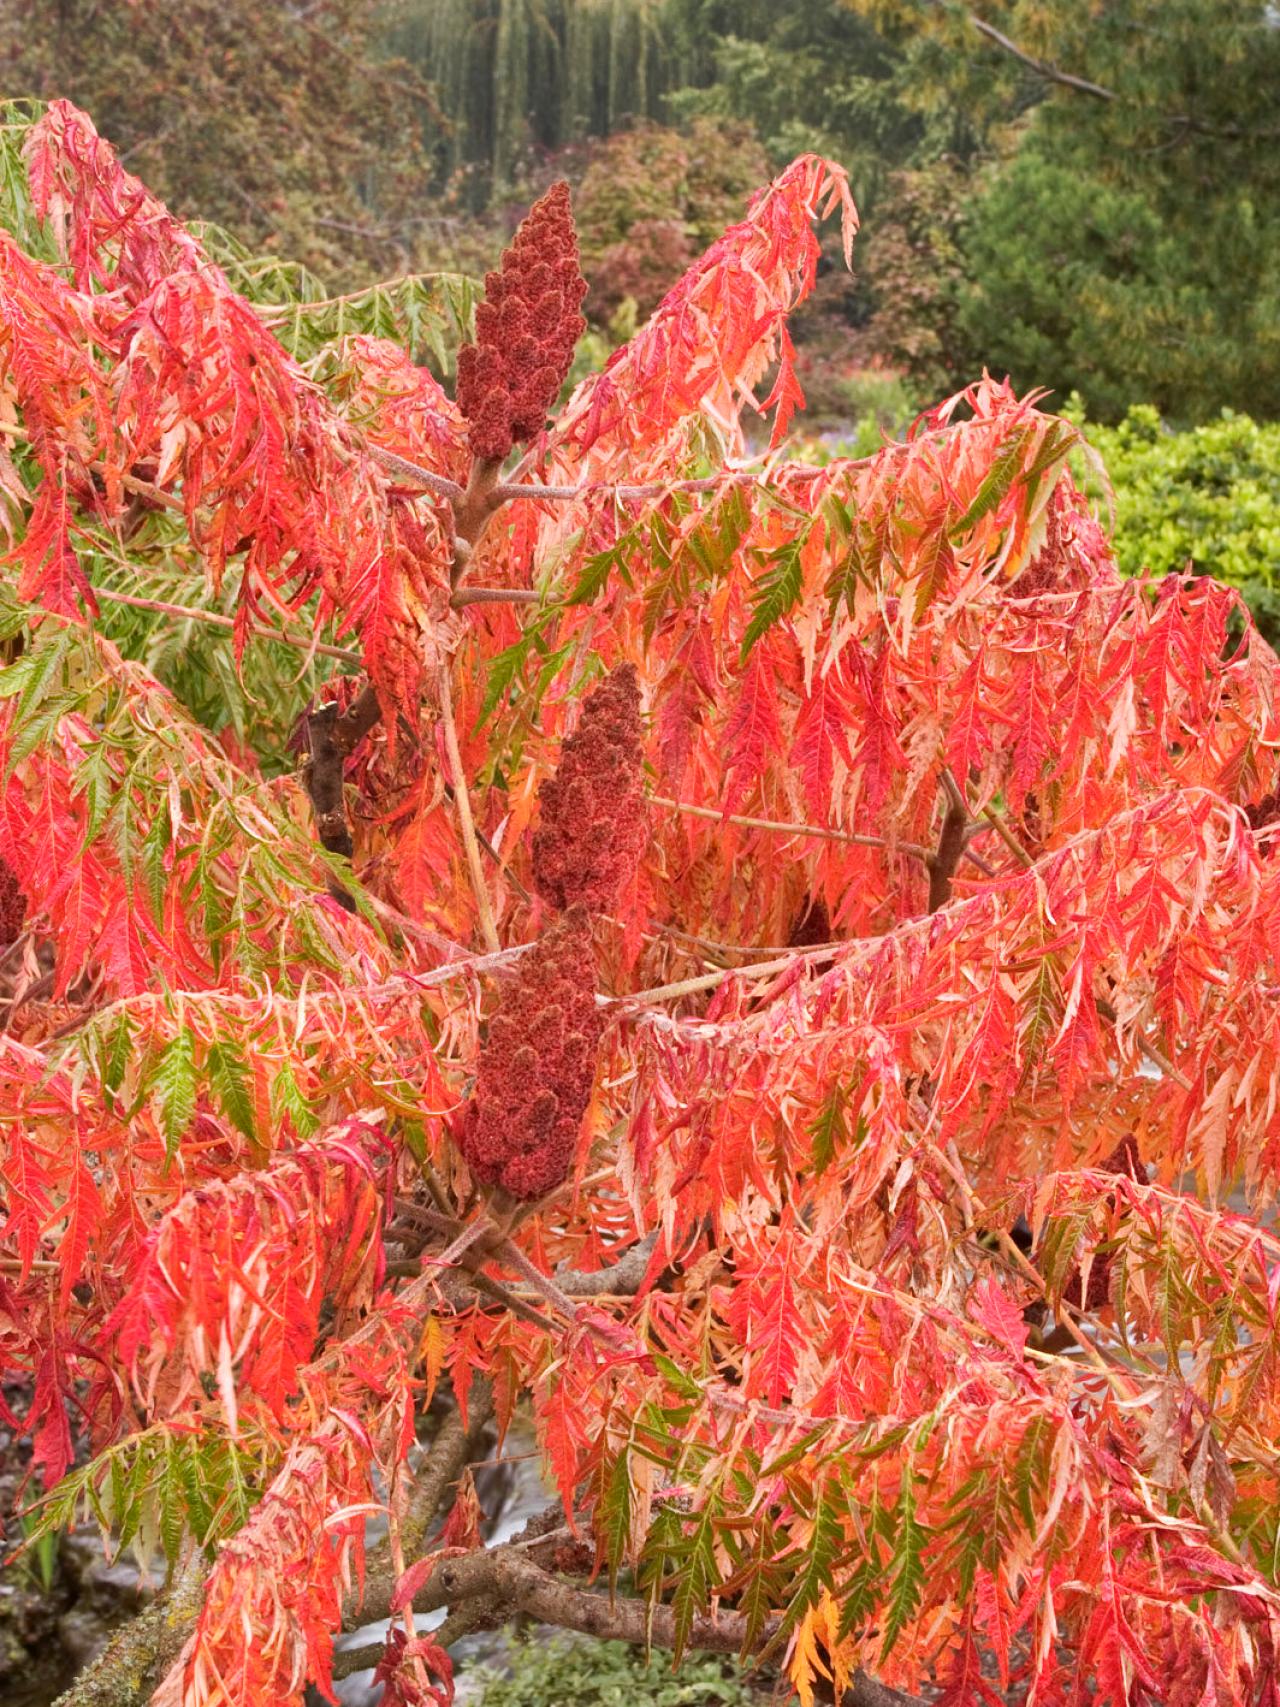 Sumac Trees Are Unsung Garden Trees Hgtv,Mixed Drinks With Vodka Recipes